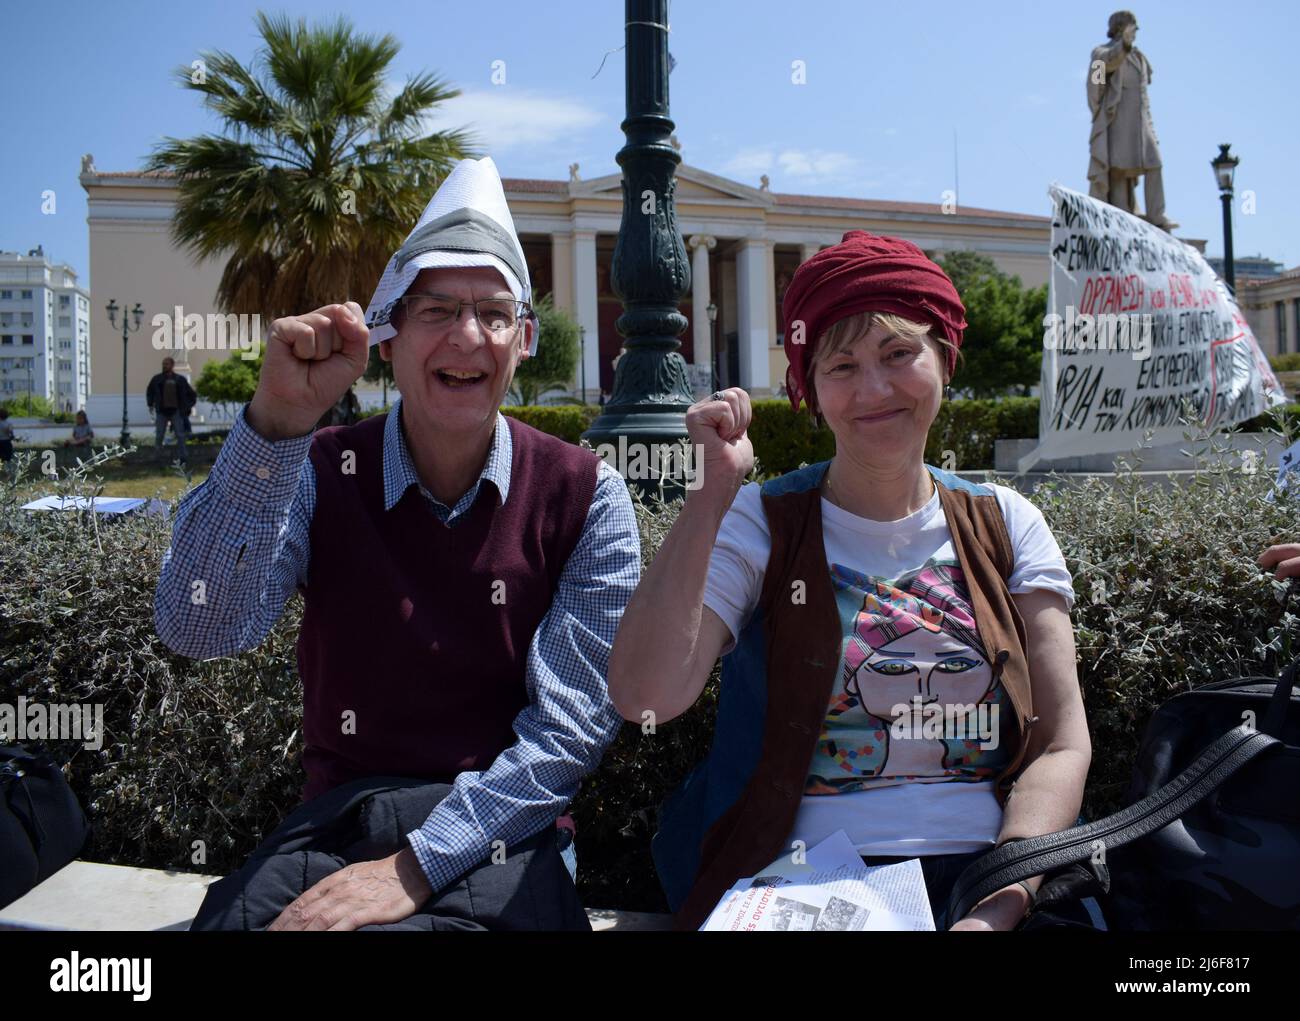 Athens, Greece, 1 May 2022. A couple of protesters gesture while participating the rally to mark International Workers Day. Thousands of Greek workers took to the streets to honor International Labour Day and protest over high prices and energy costs plaguing households as the conflict in Ukraine takes its toll on European economies. Credit: Dimitris Aspiotis / Alamy Live News Stock Photo